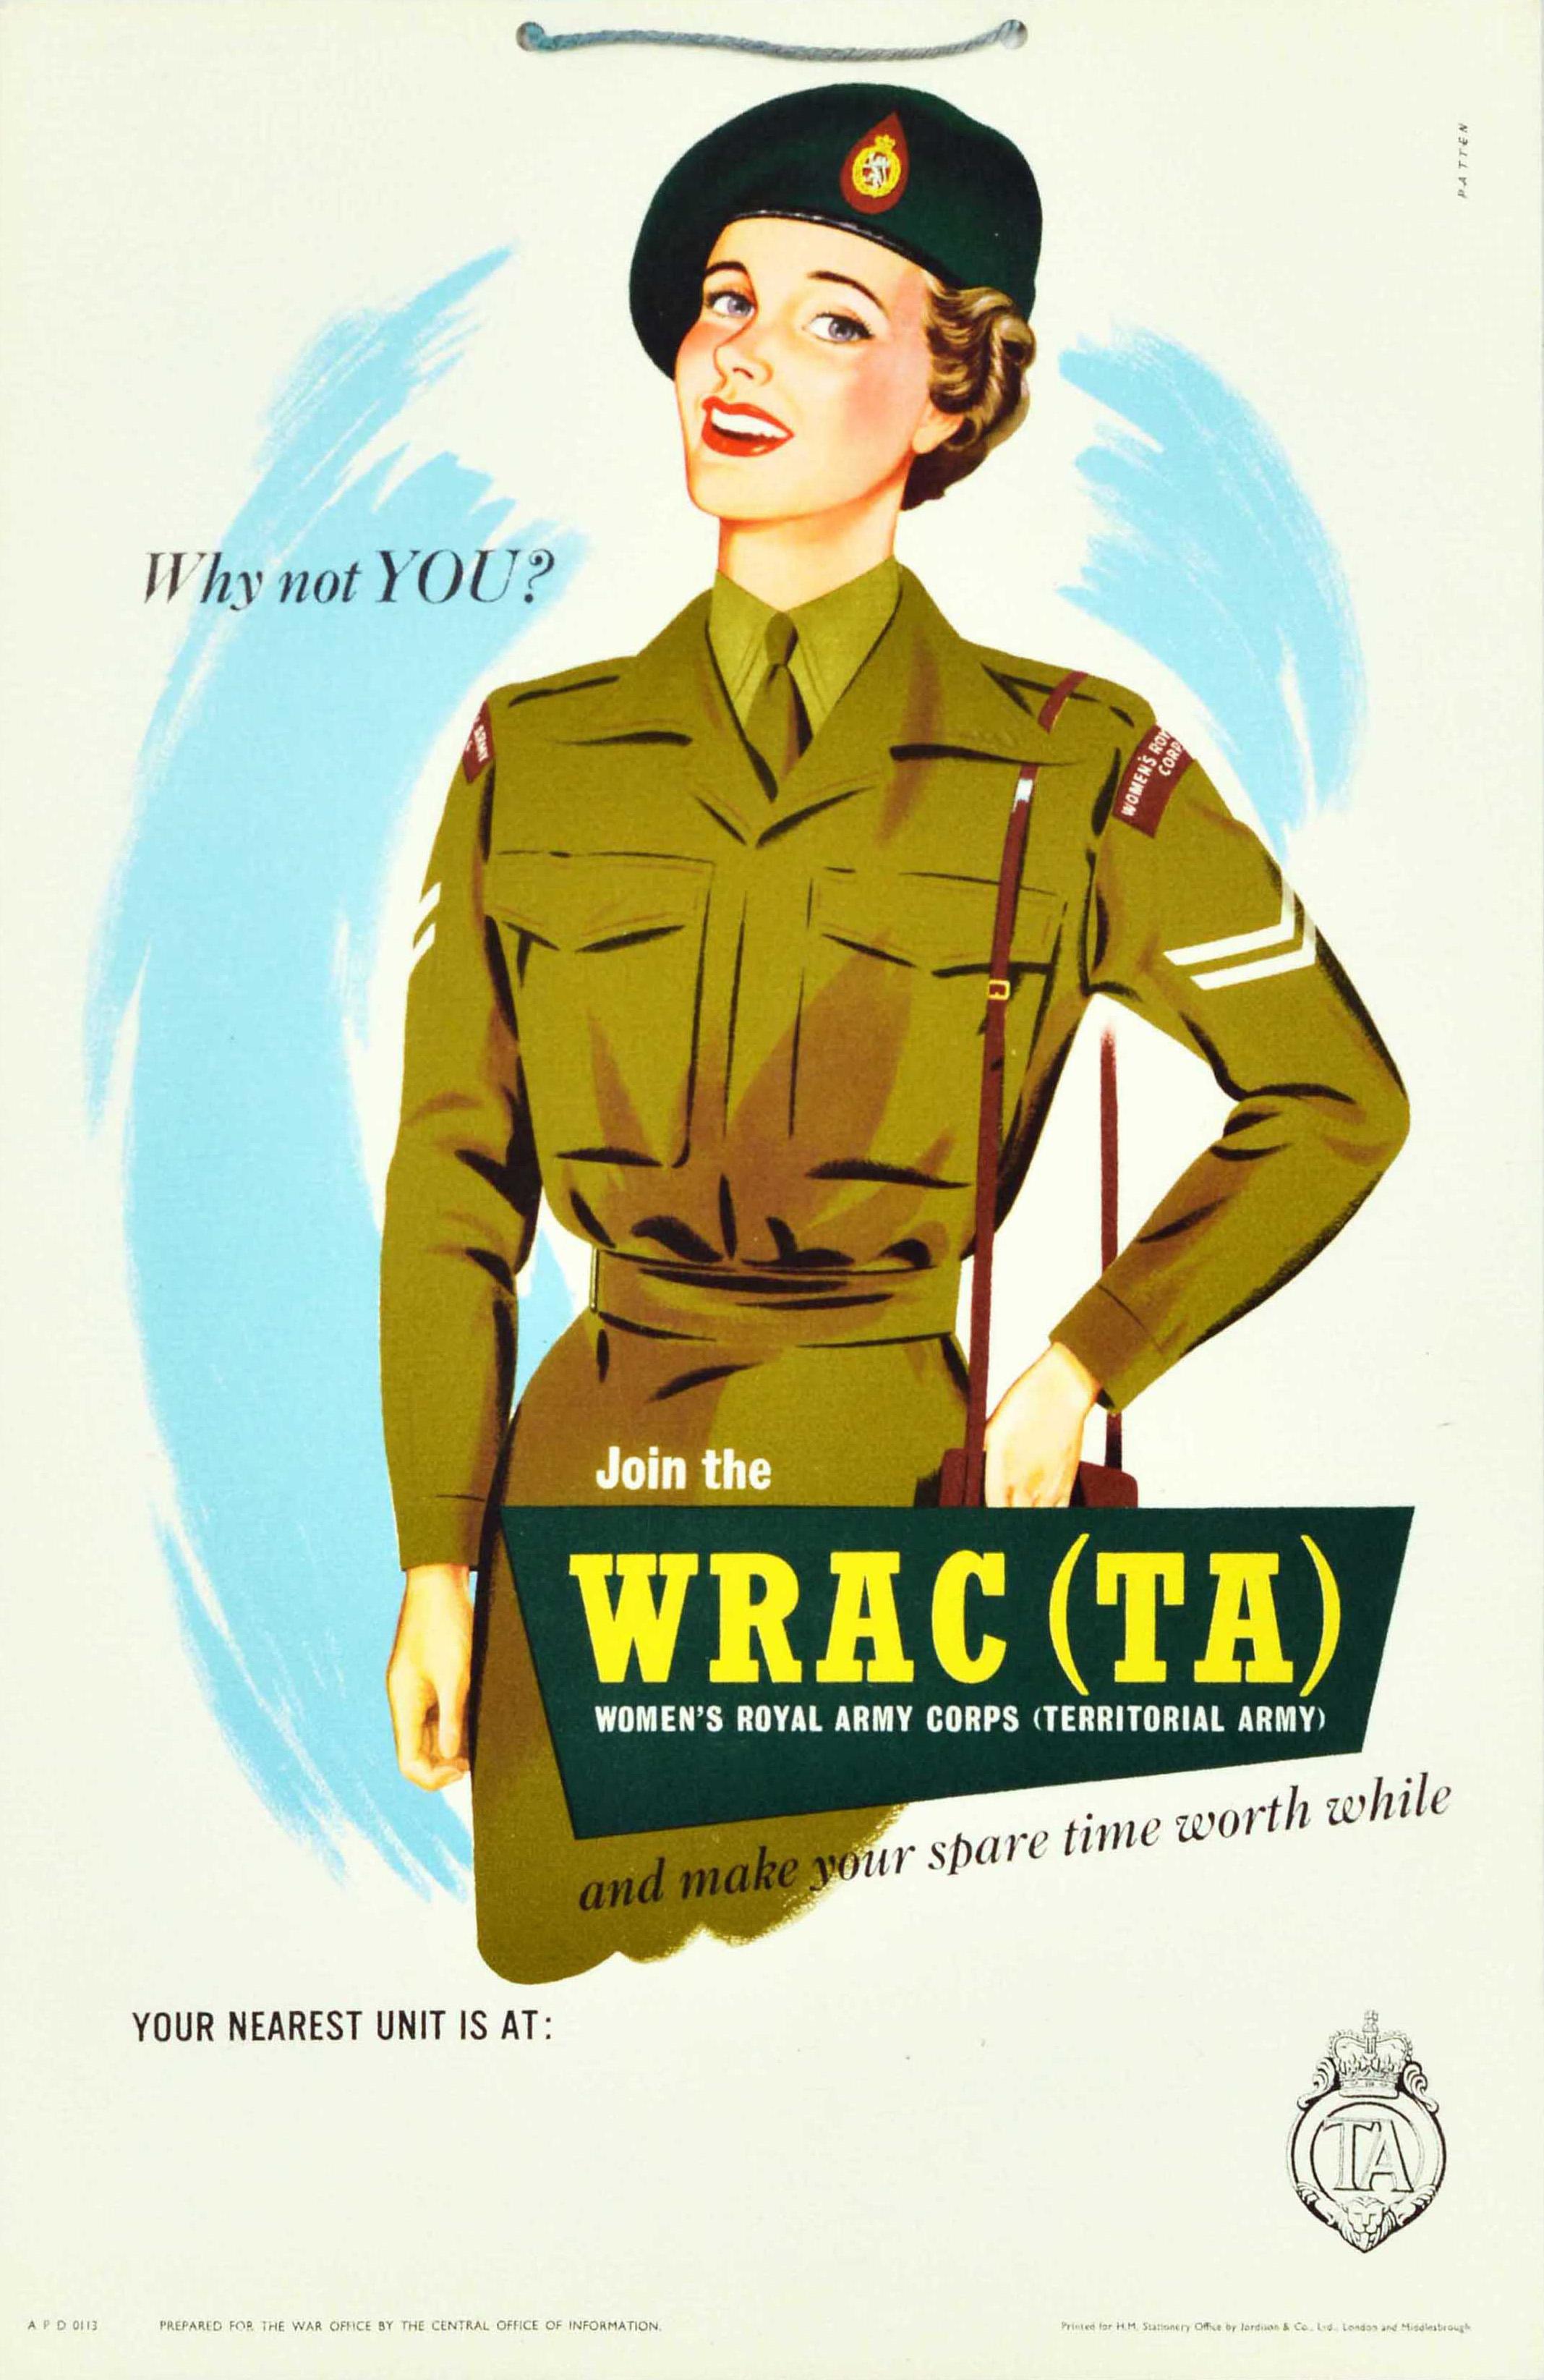 Patten Print - Original Vintage Poster Why Not You Women's Royal Army Corps Territorial Army